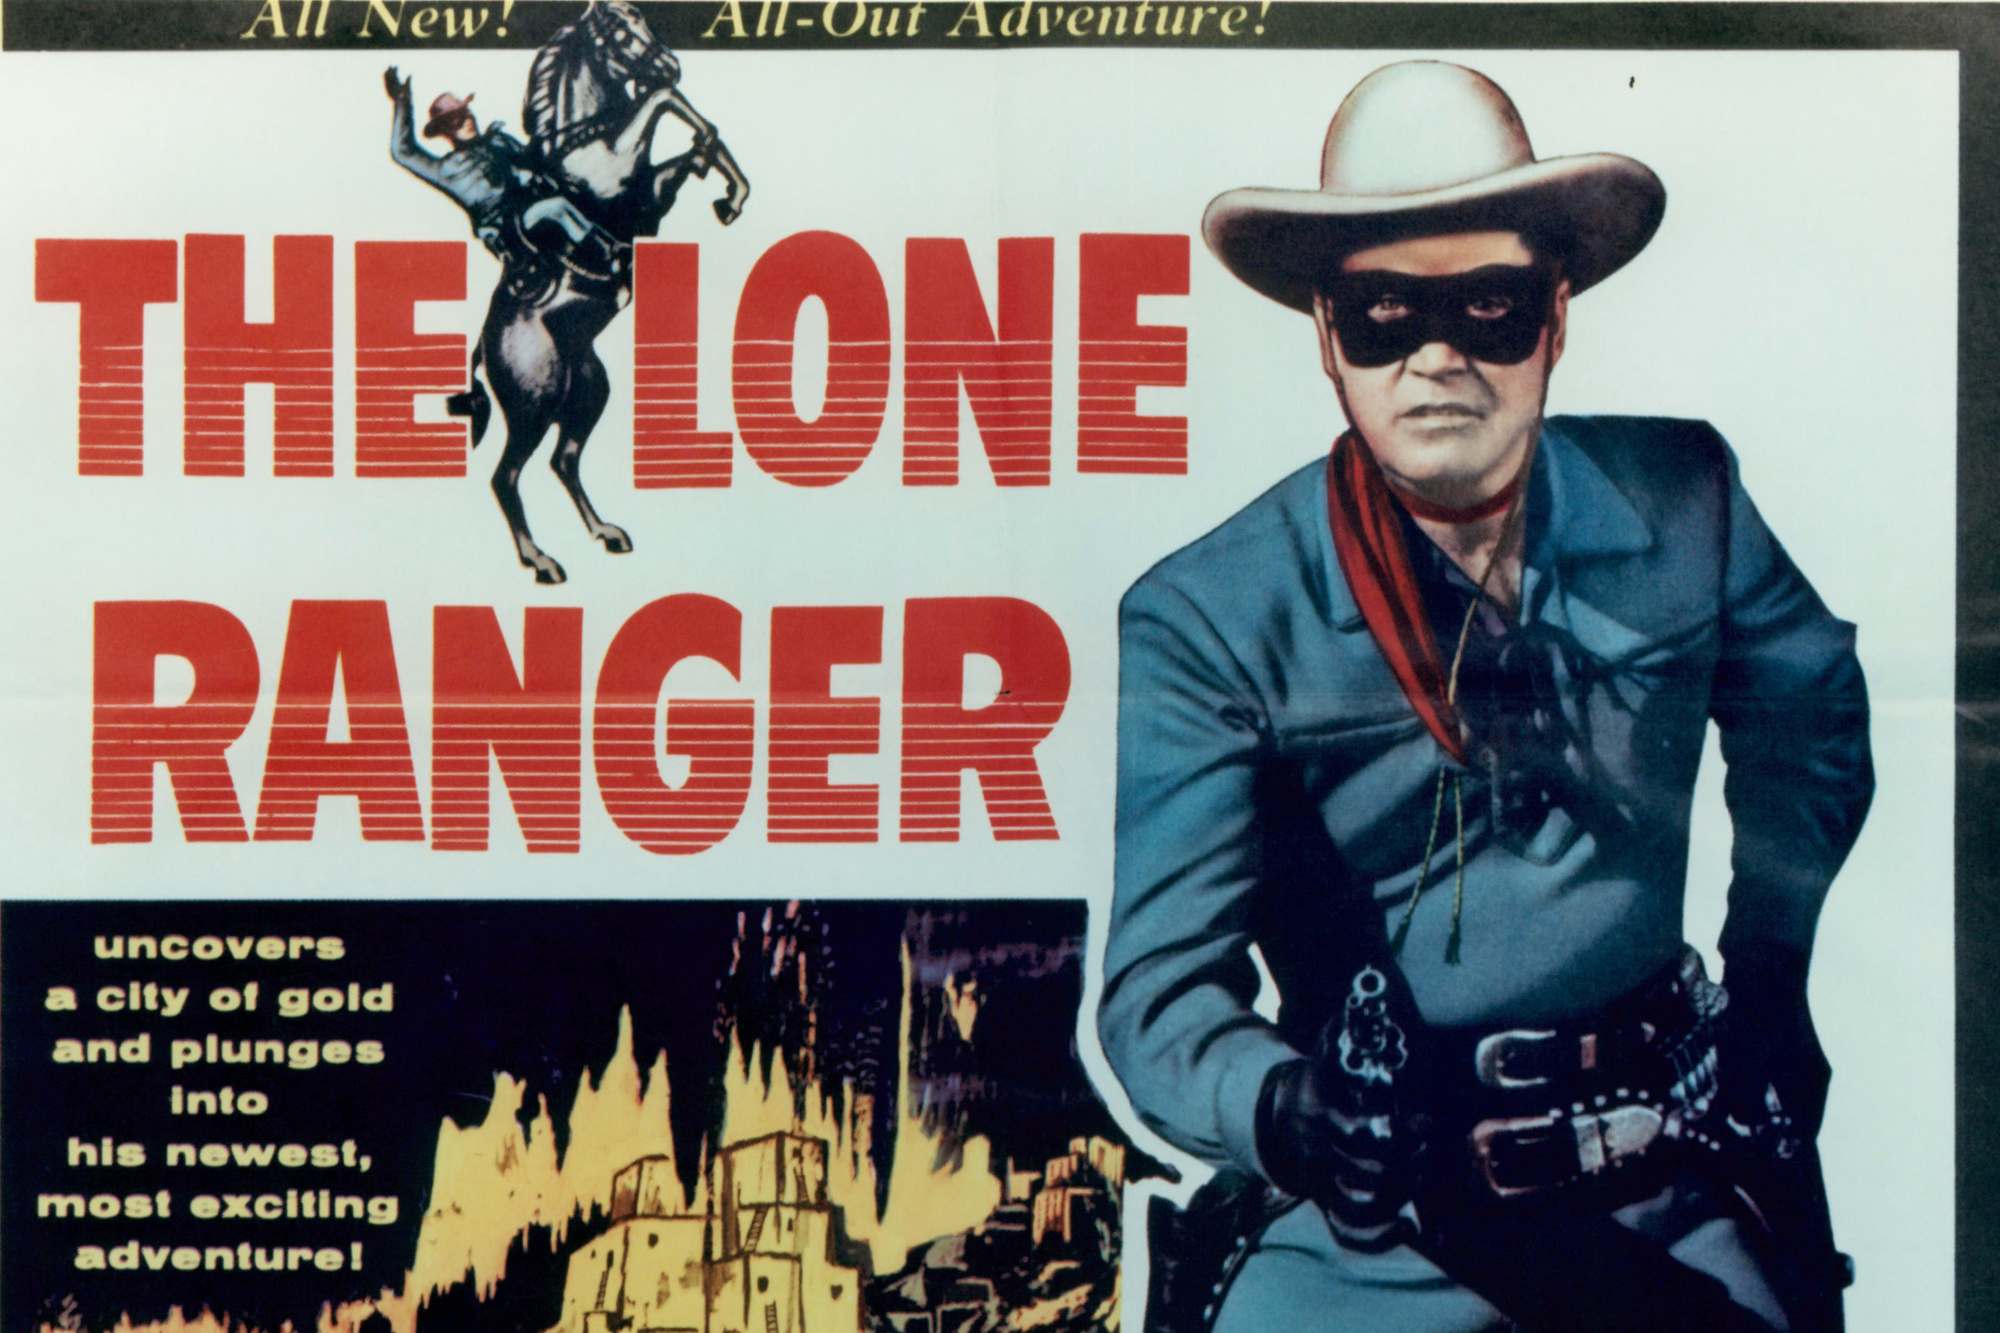 'The Lone Ranger' awards nominee. Clayton Moore in a publicity poster wearing the Lone Ranger costume, holding his gun out next to the logo.